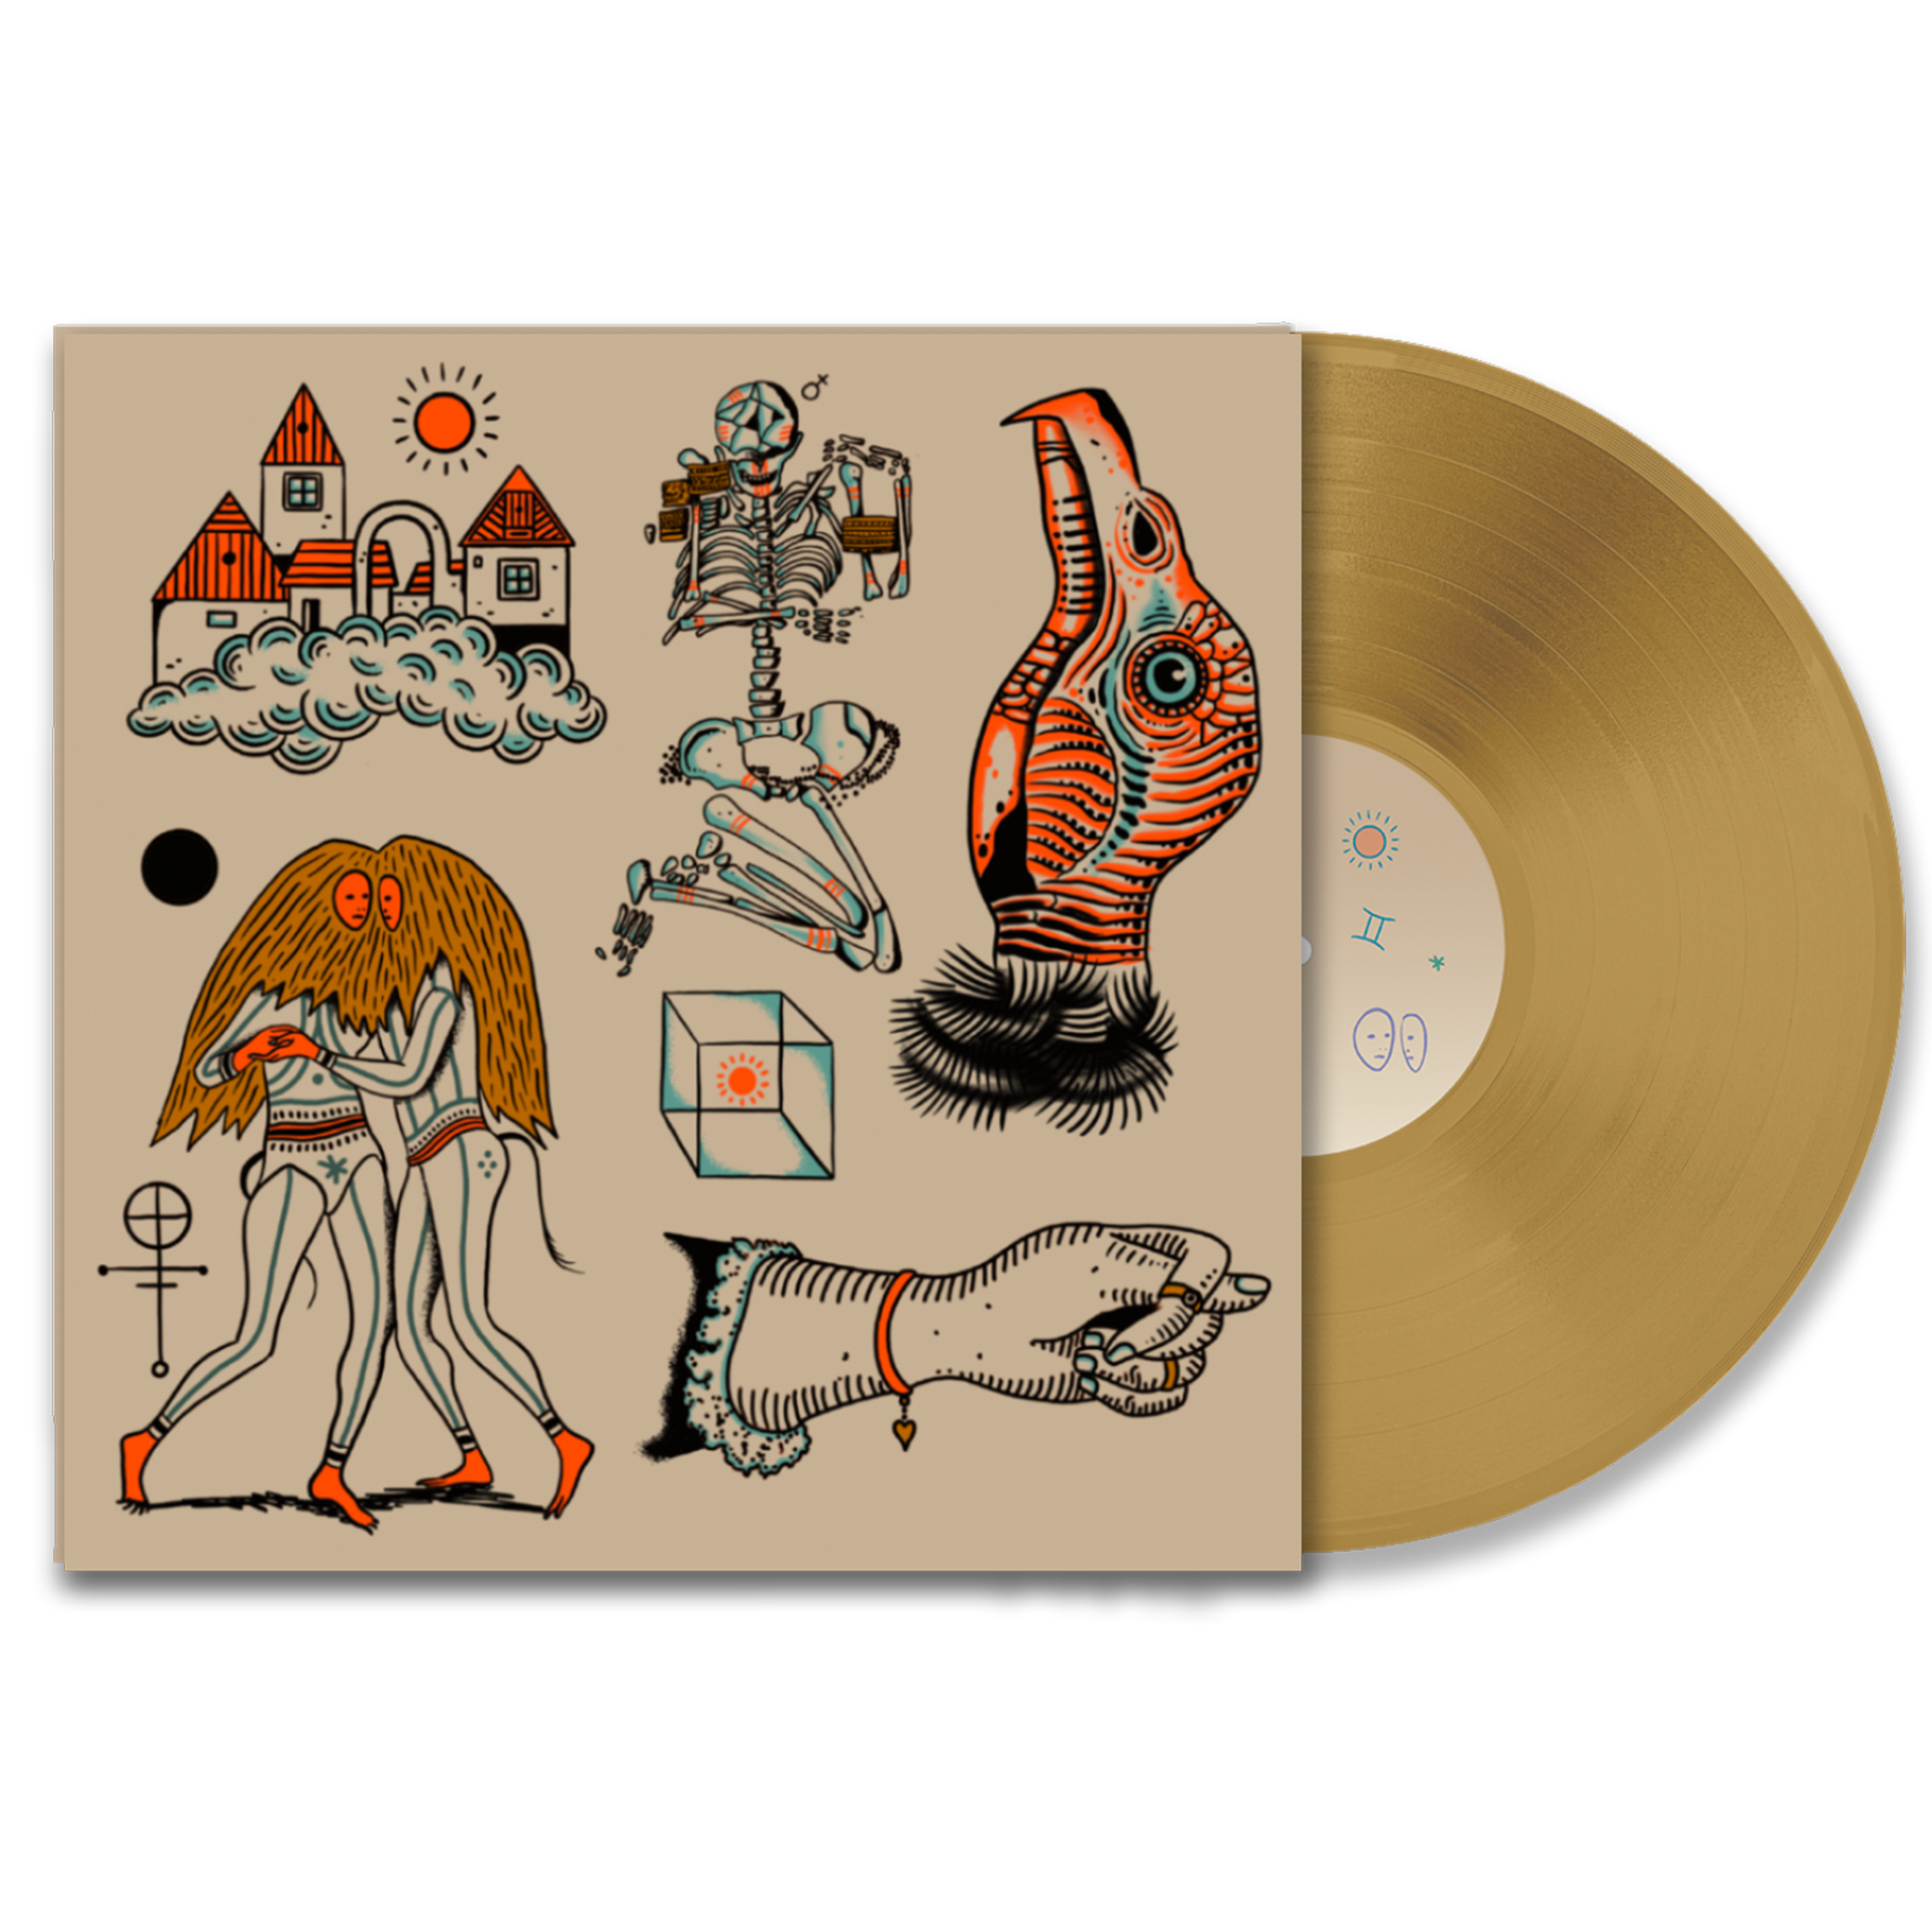 HFAW - Vinyl in Limited-Edition Gold